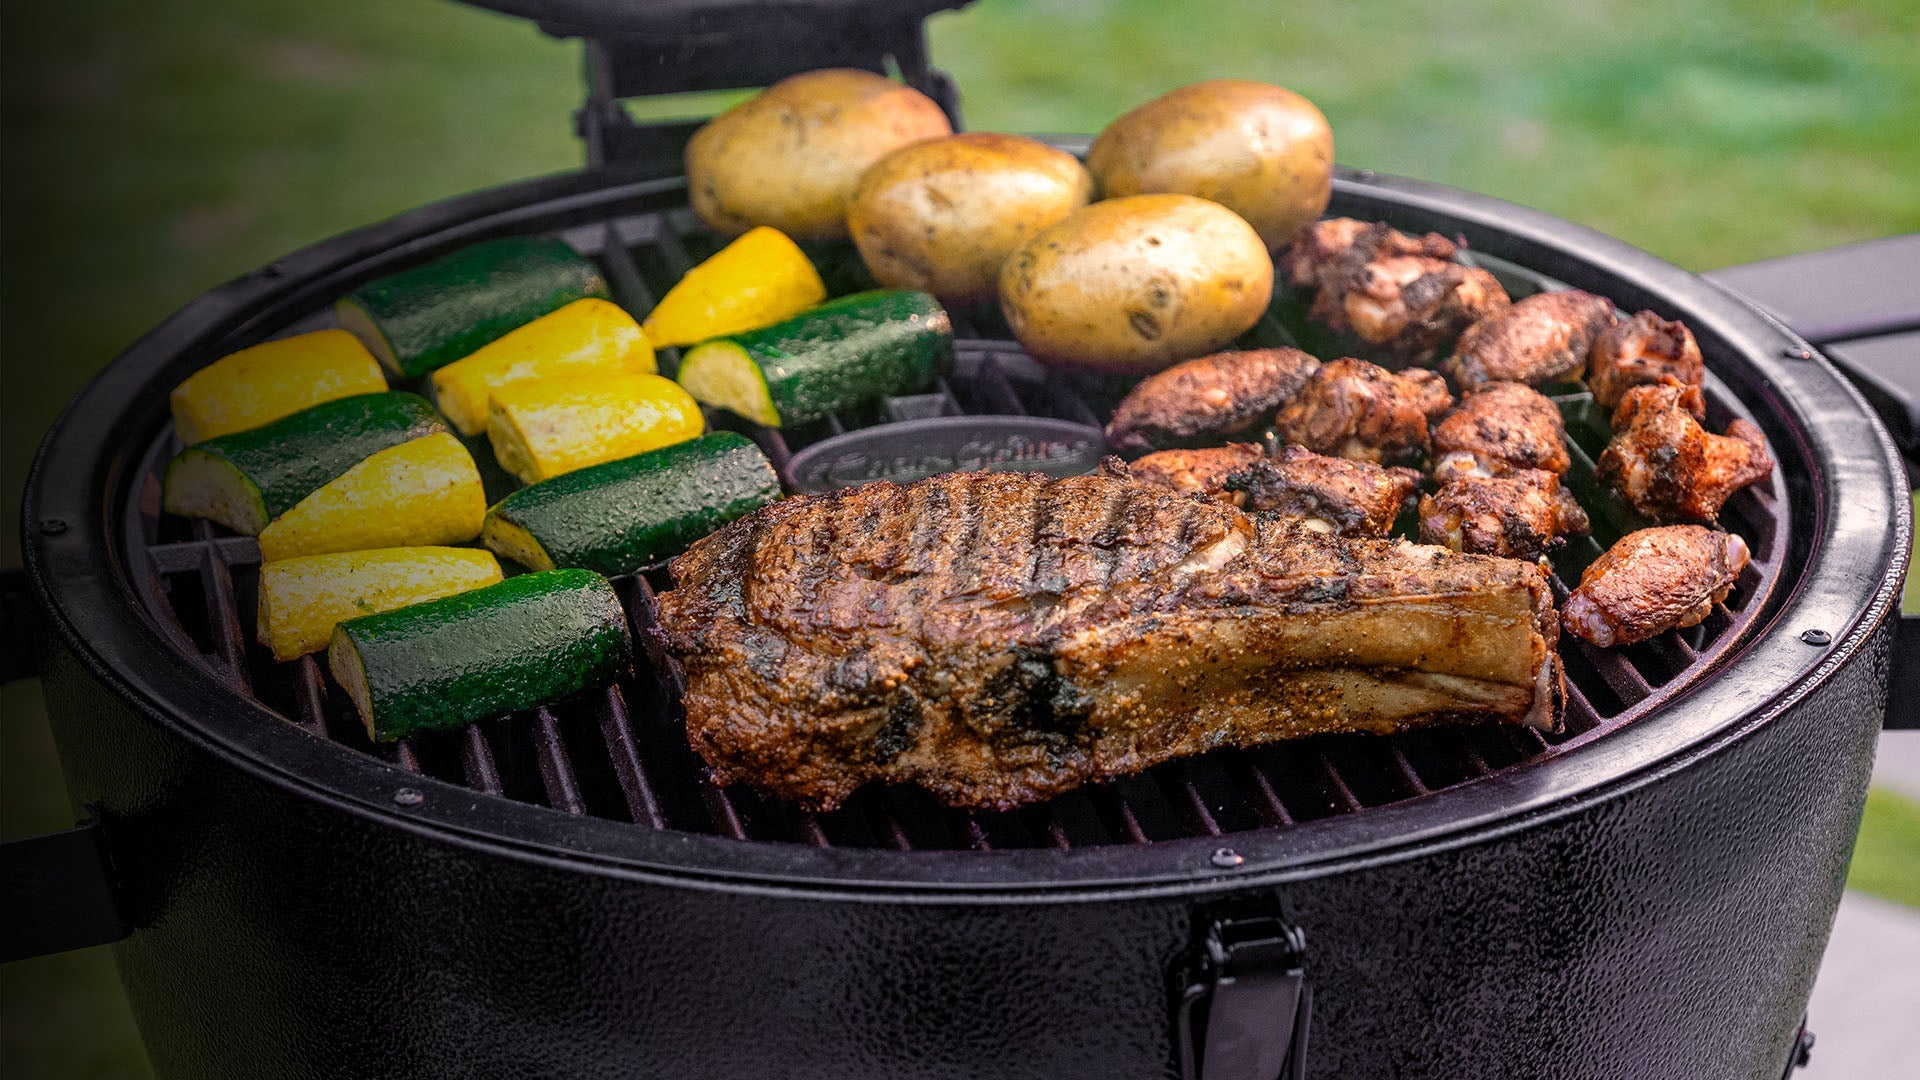 Chunks of zucchini and yellow squash grill next to whole potatoes, chicken wings, and a large steak on the grate of an AKORN Kamado grill